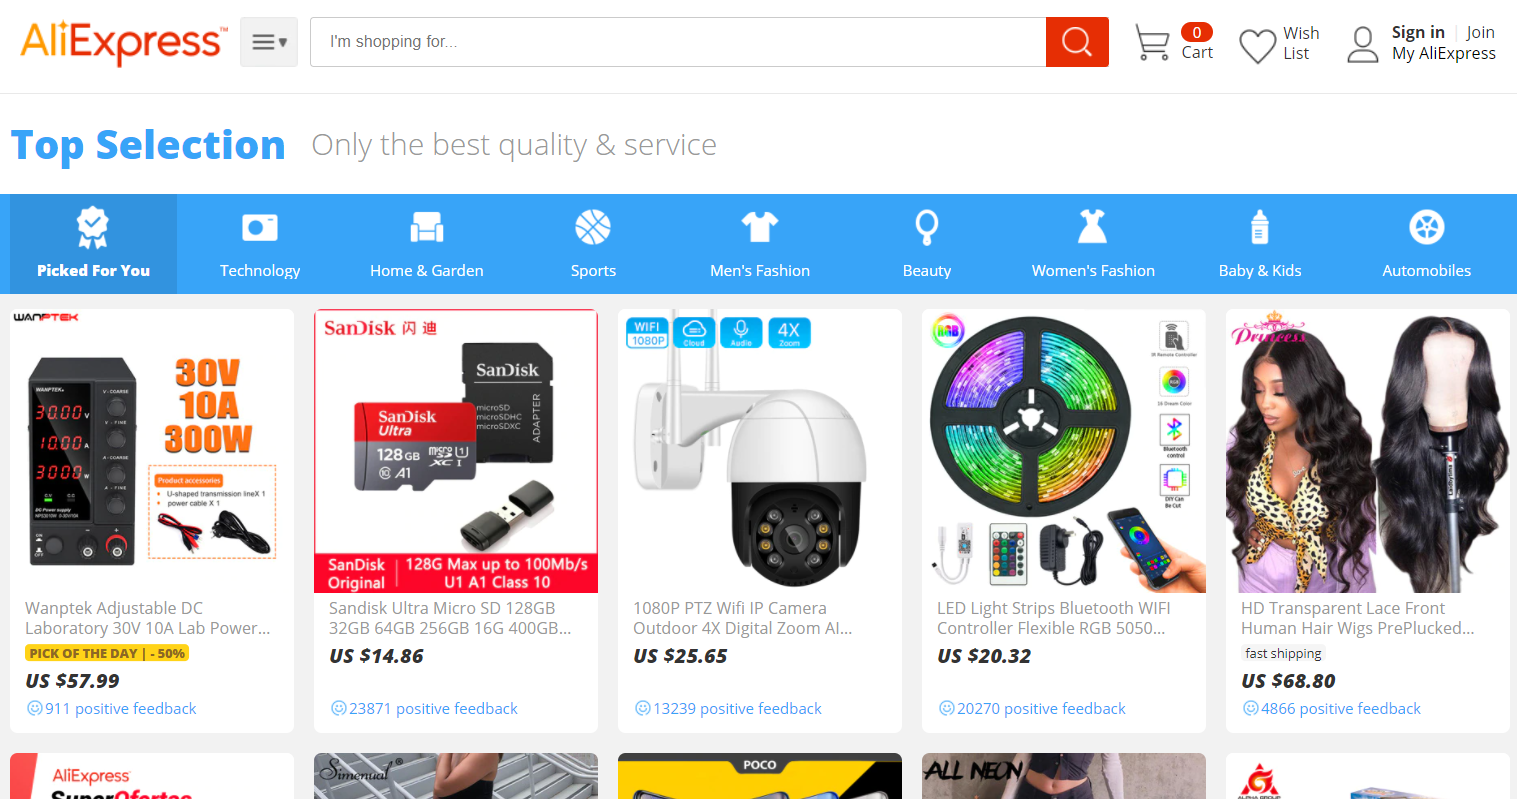 AliExpress Best Sellers Research Guide 2023-2024